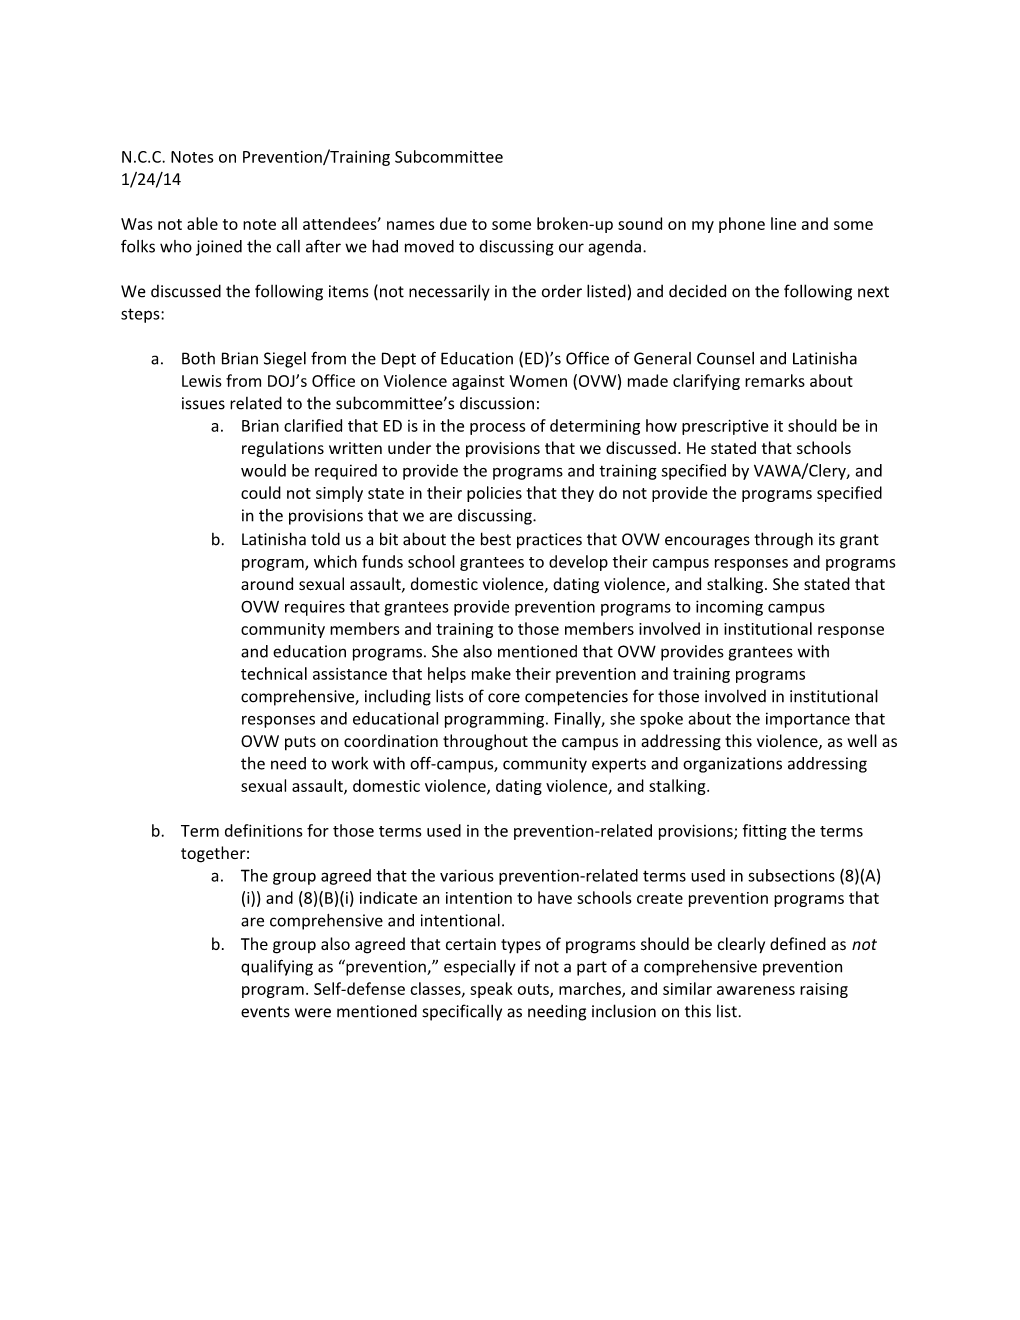 Negotiated Rulemaking for Higher Education 2012-2014: VAWA NCC Notes on Prevention/Training